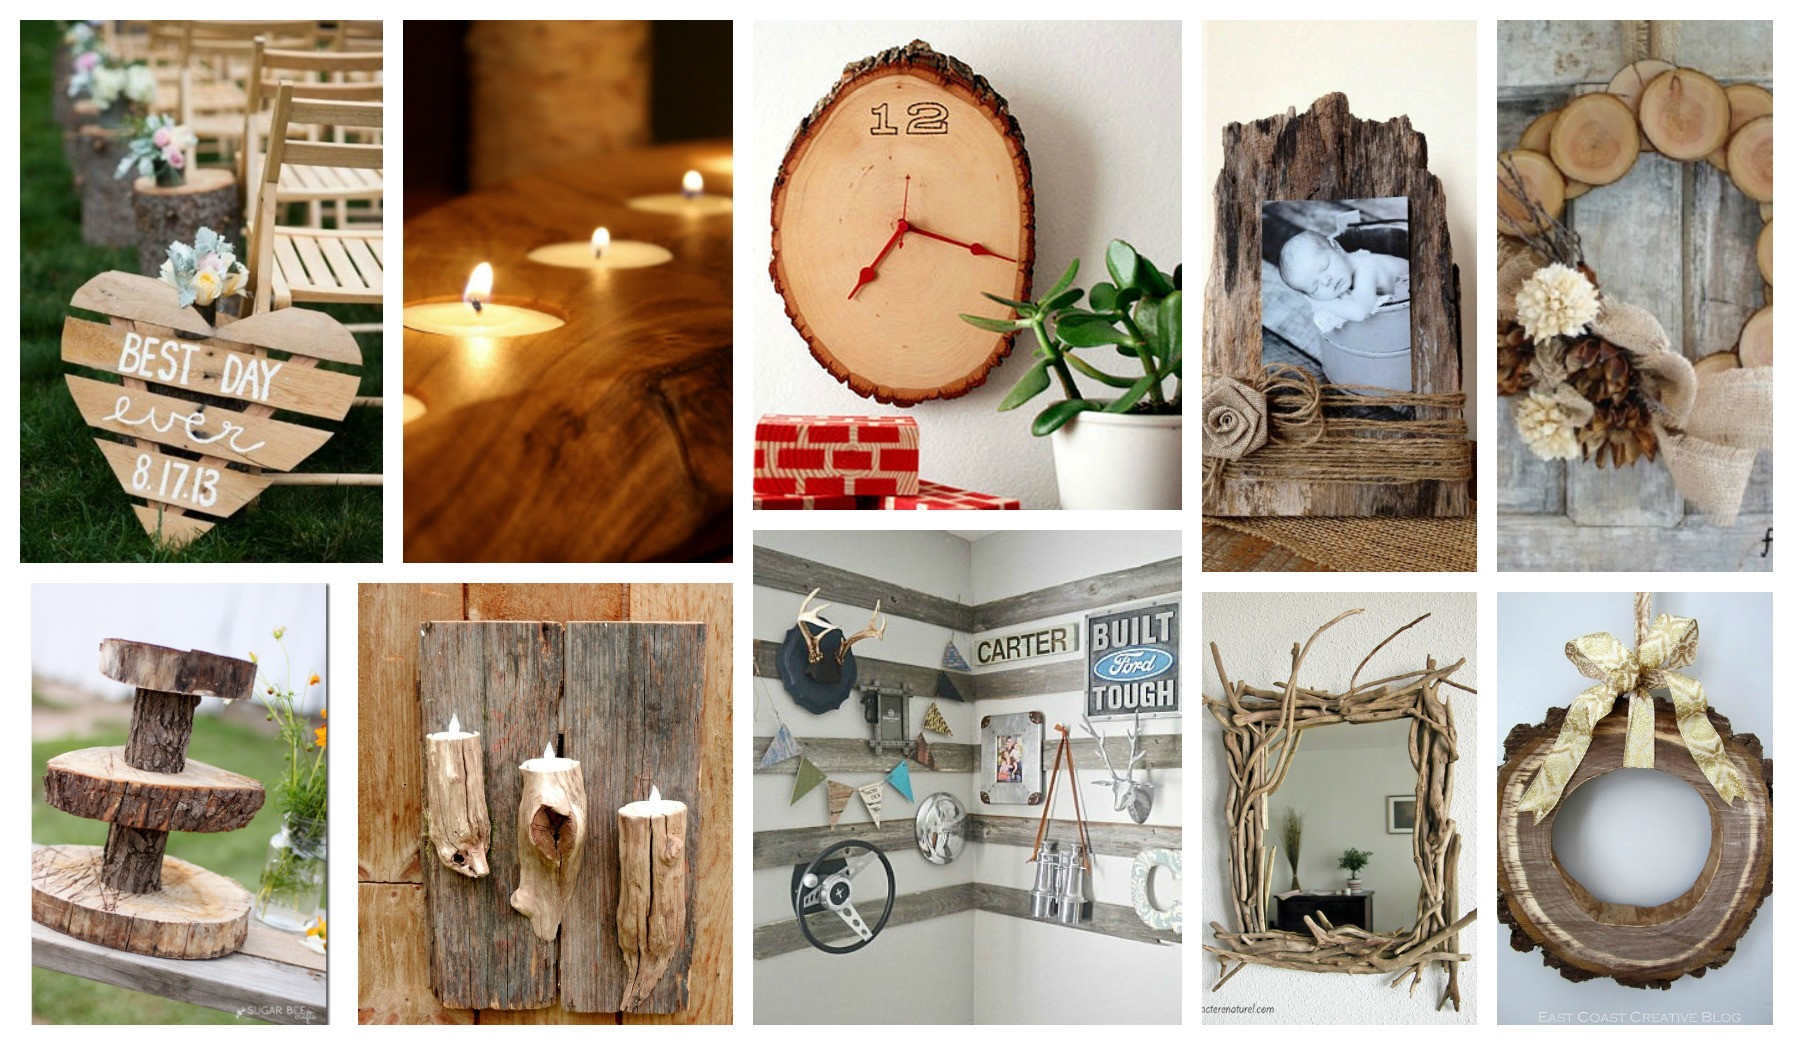 DIY Wood Decor
 Stupendous DIY Rustic Wood Decor That Will Make You Say Wow